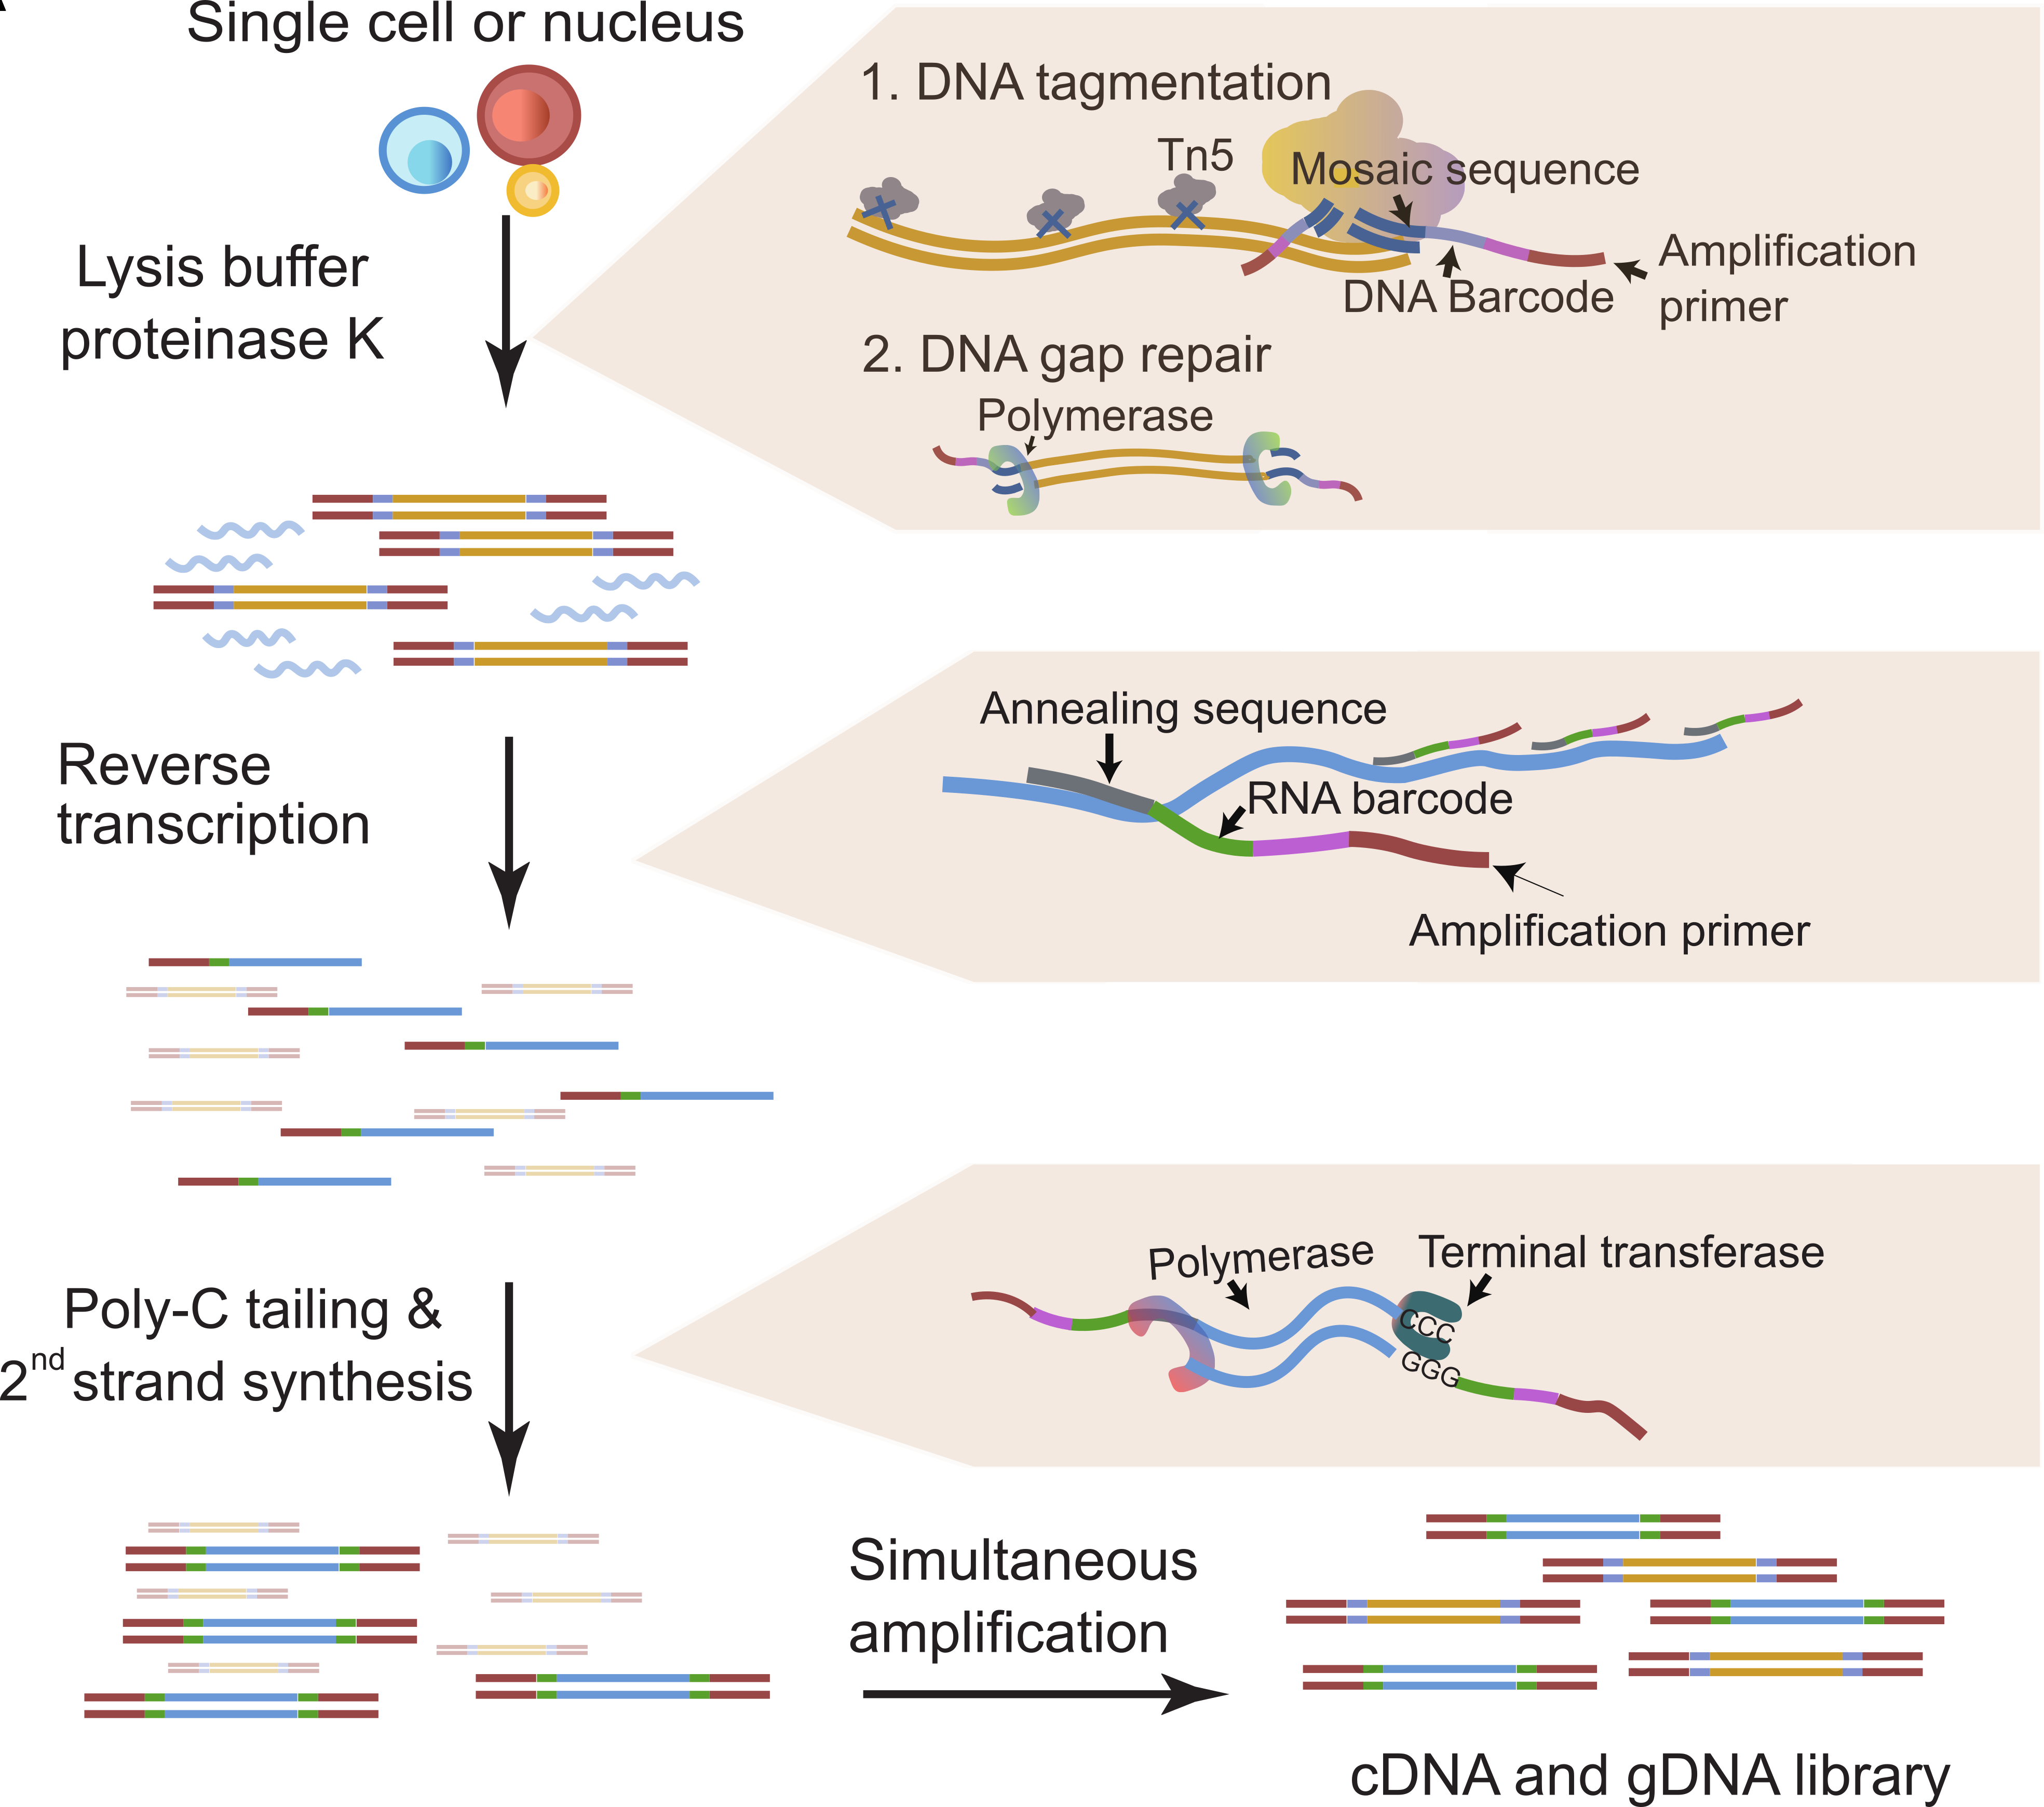 The new versatile single-cell multi-omic profiling technology scONE-seq developed by the research team converts DNA and RNA in single cells to sequencing libraries for analysis